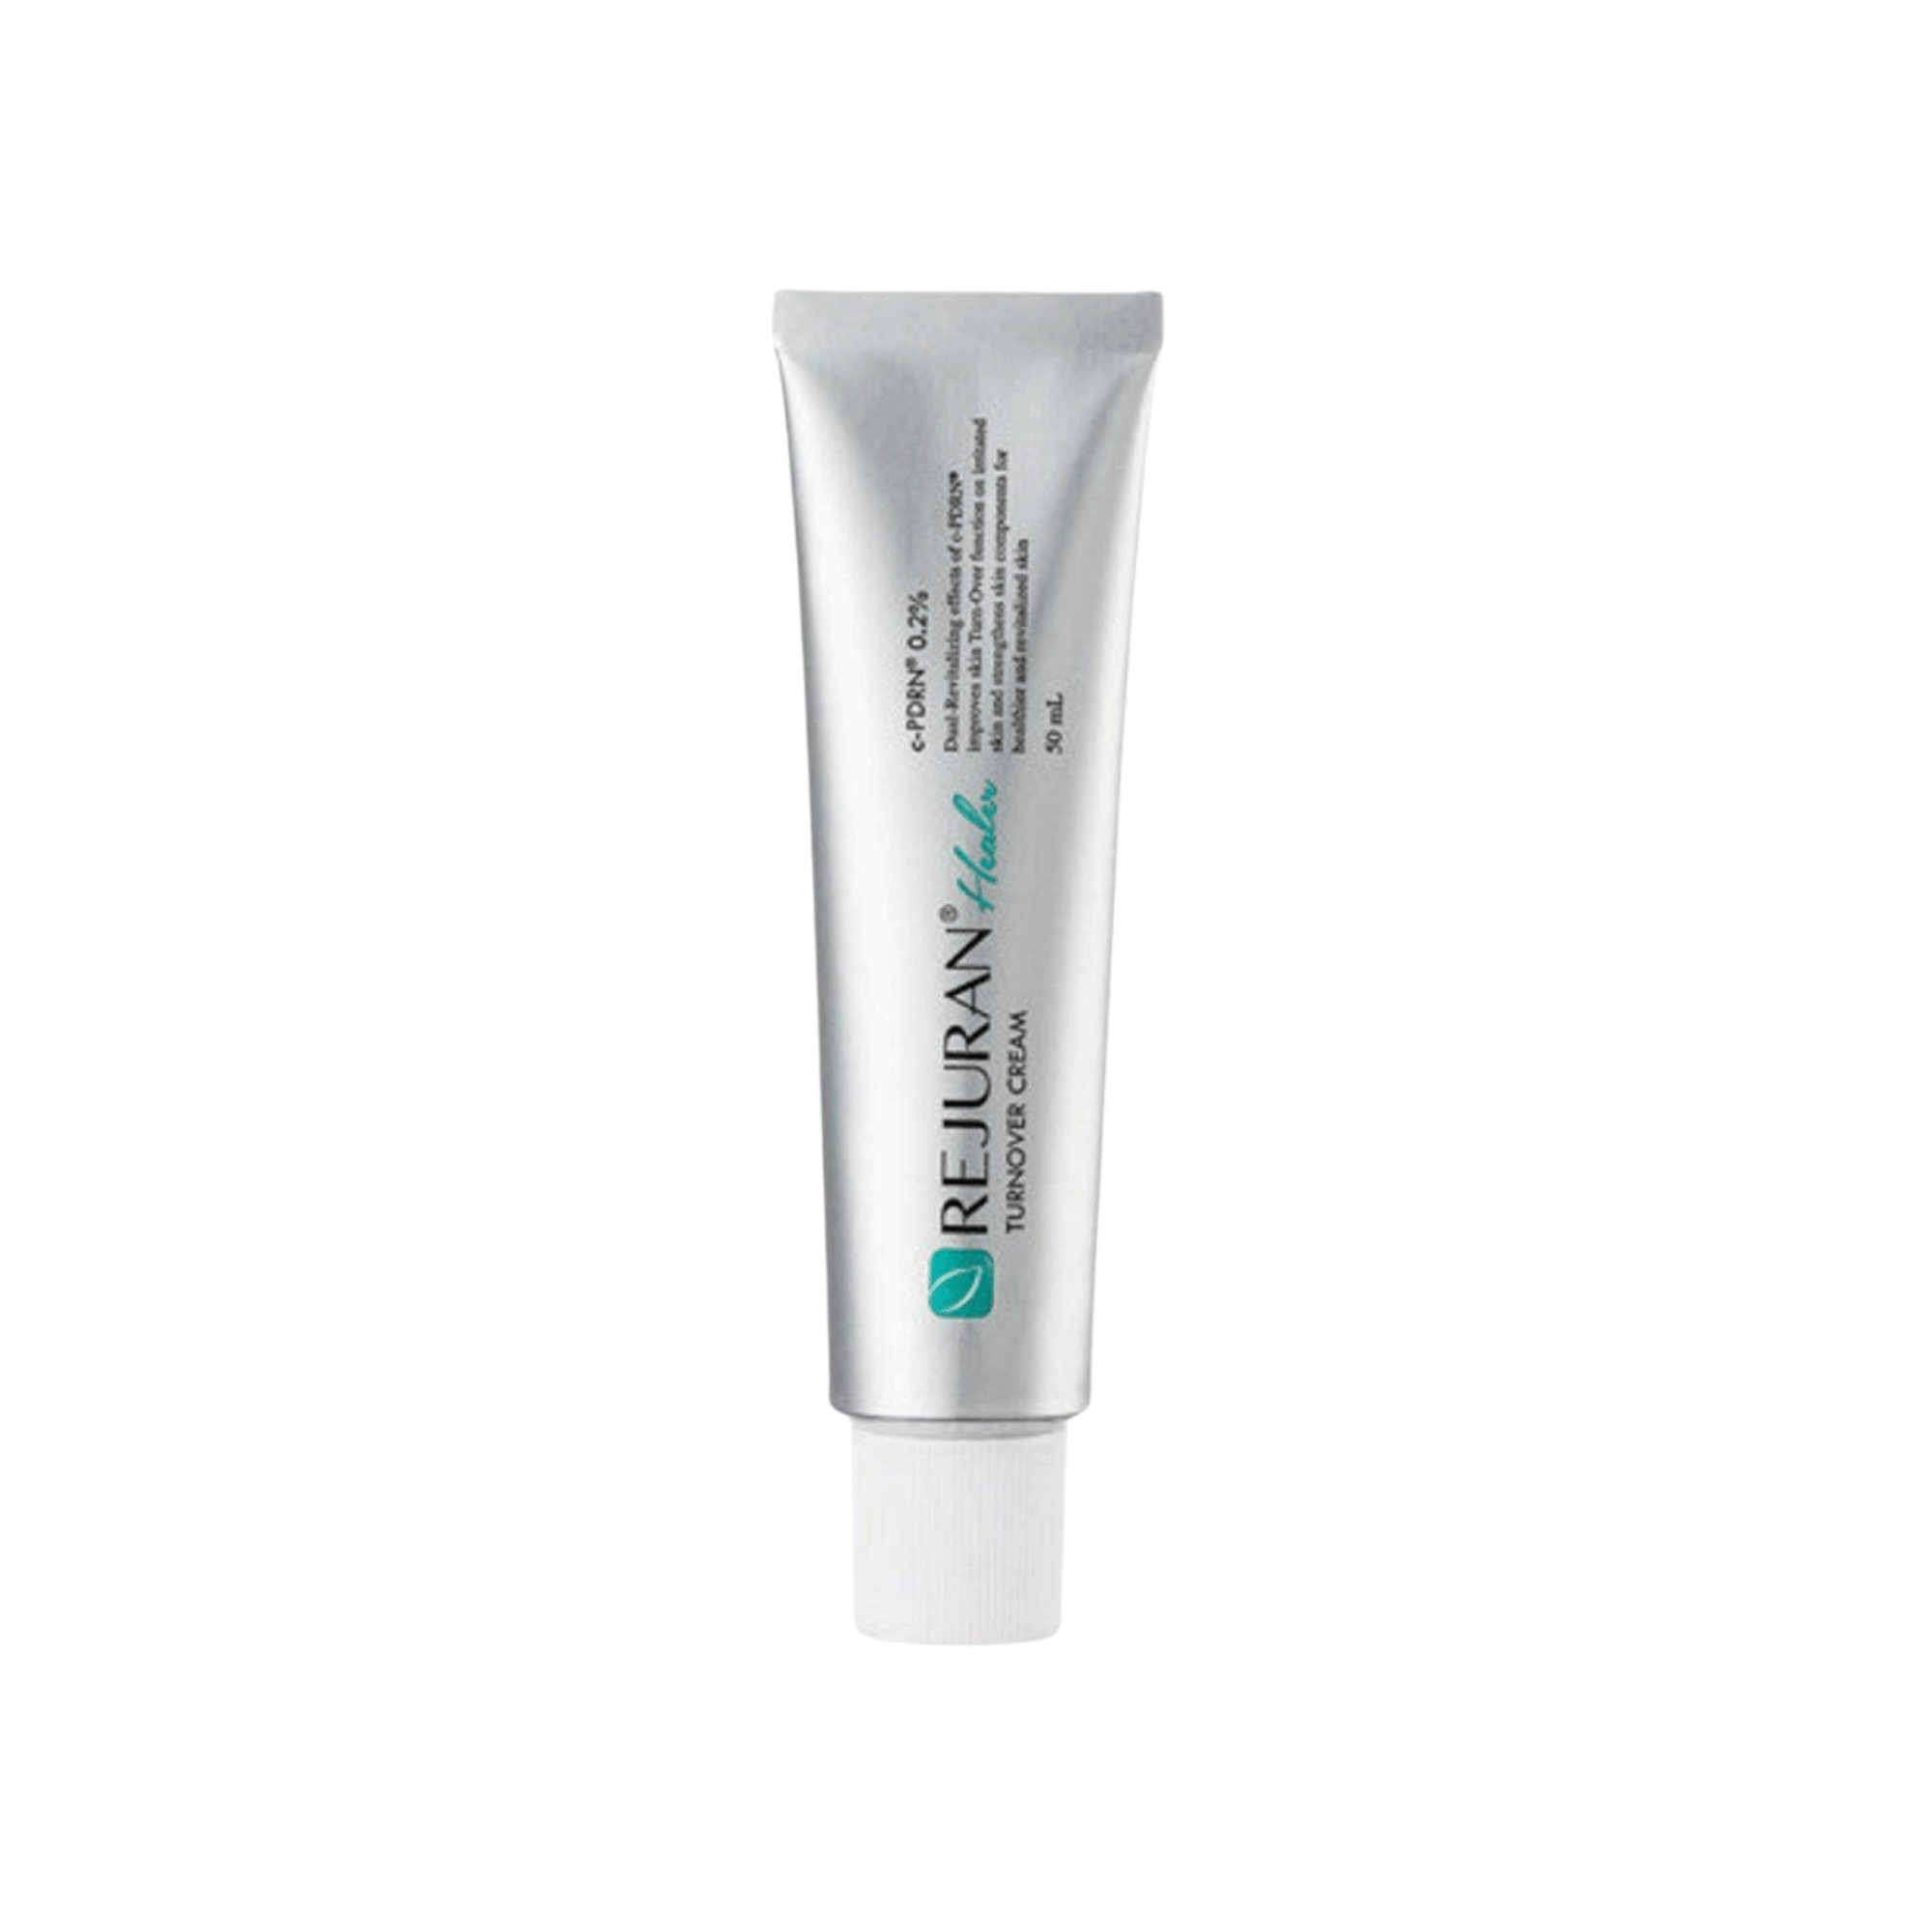 rejuran malaysia turnover cream help soothe your skin back to comfort and strengthen the skin’s natural barrier